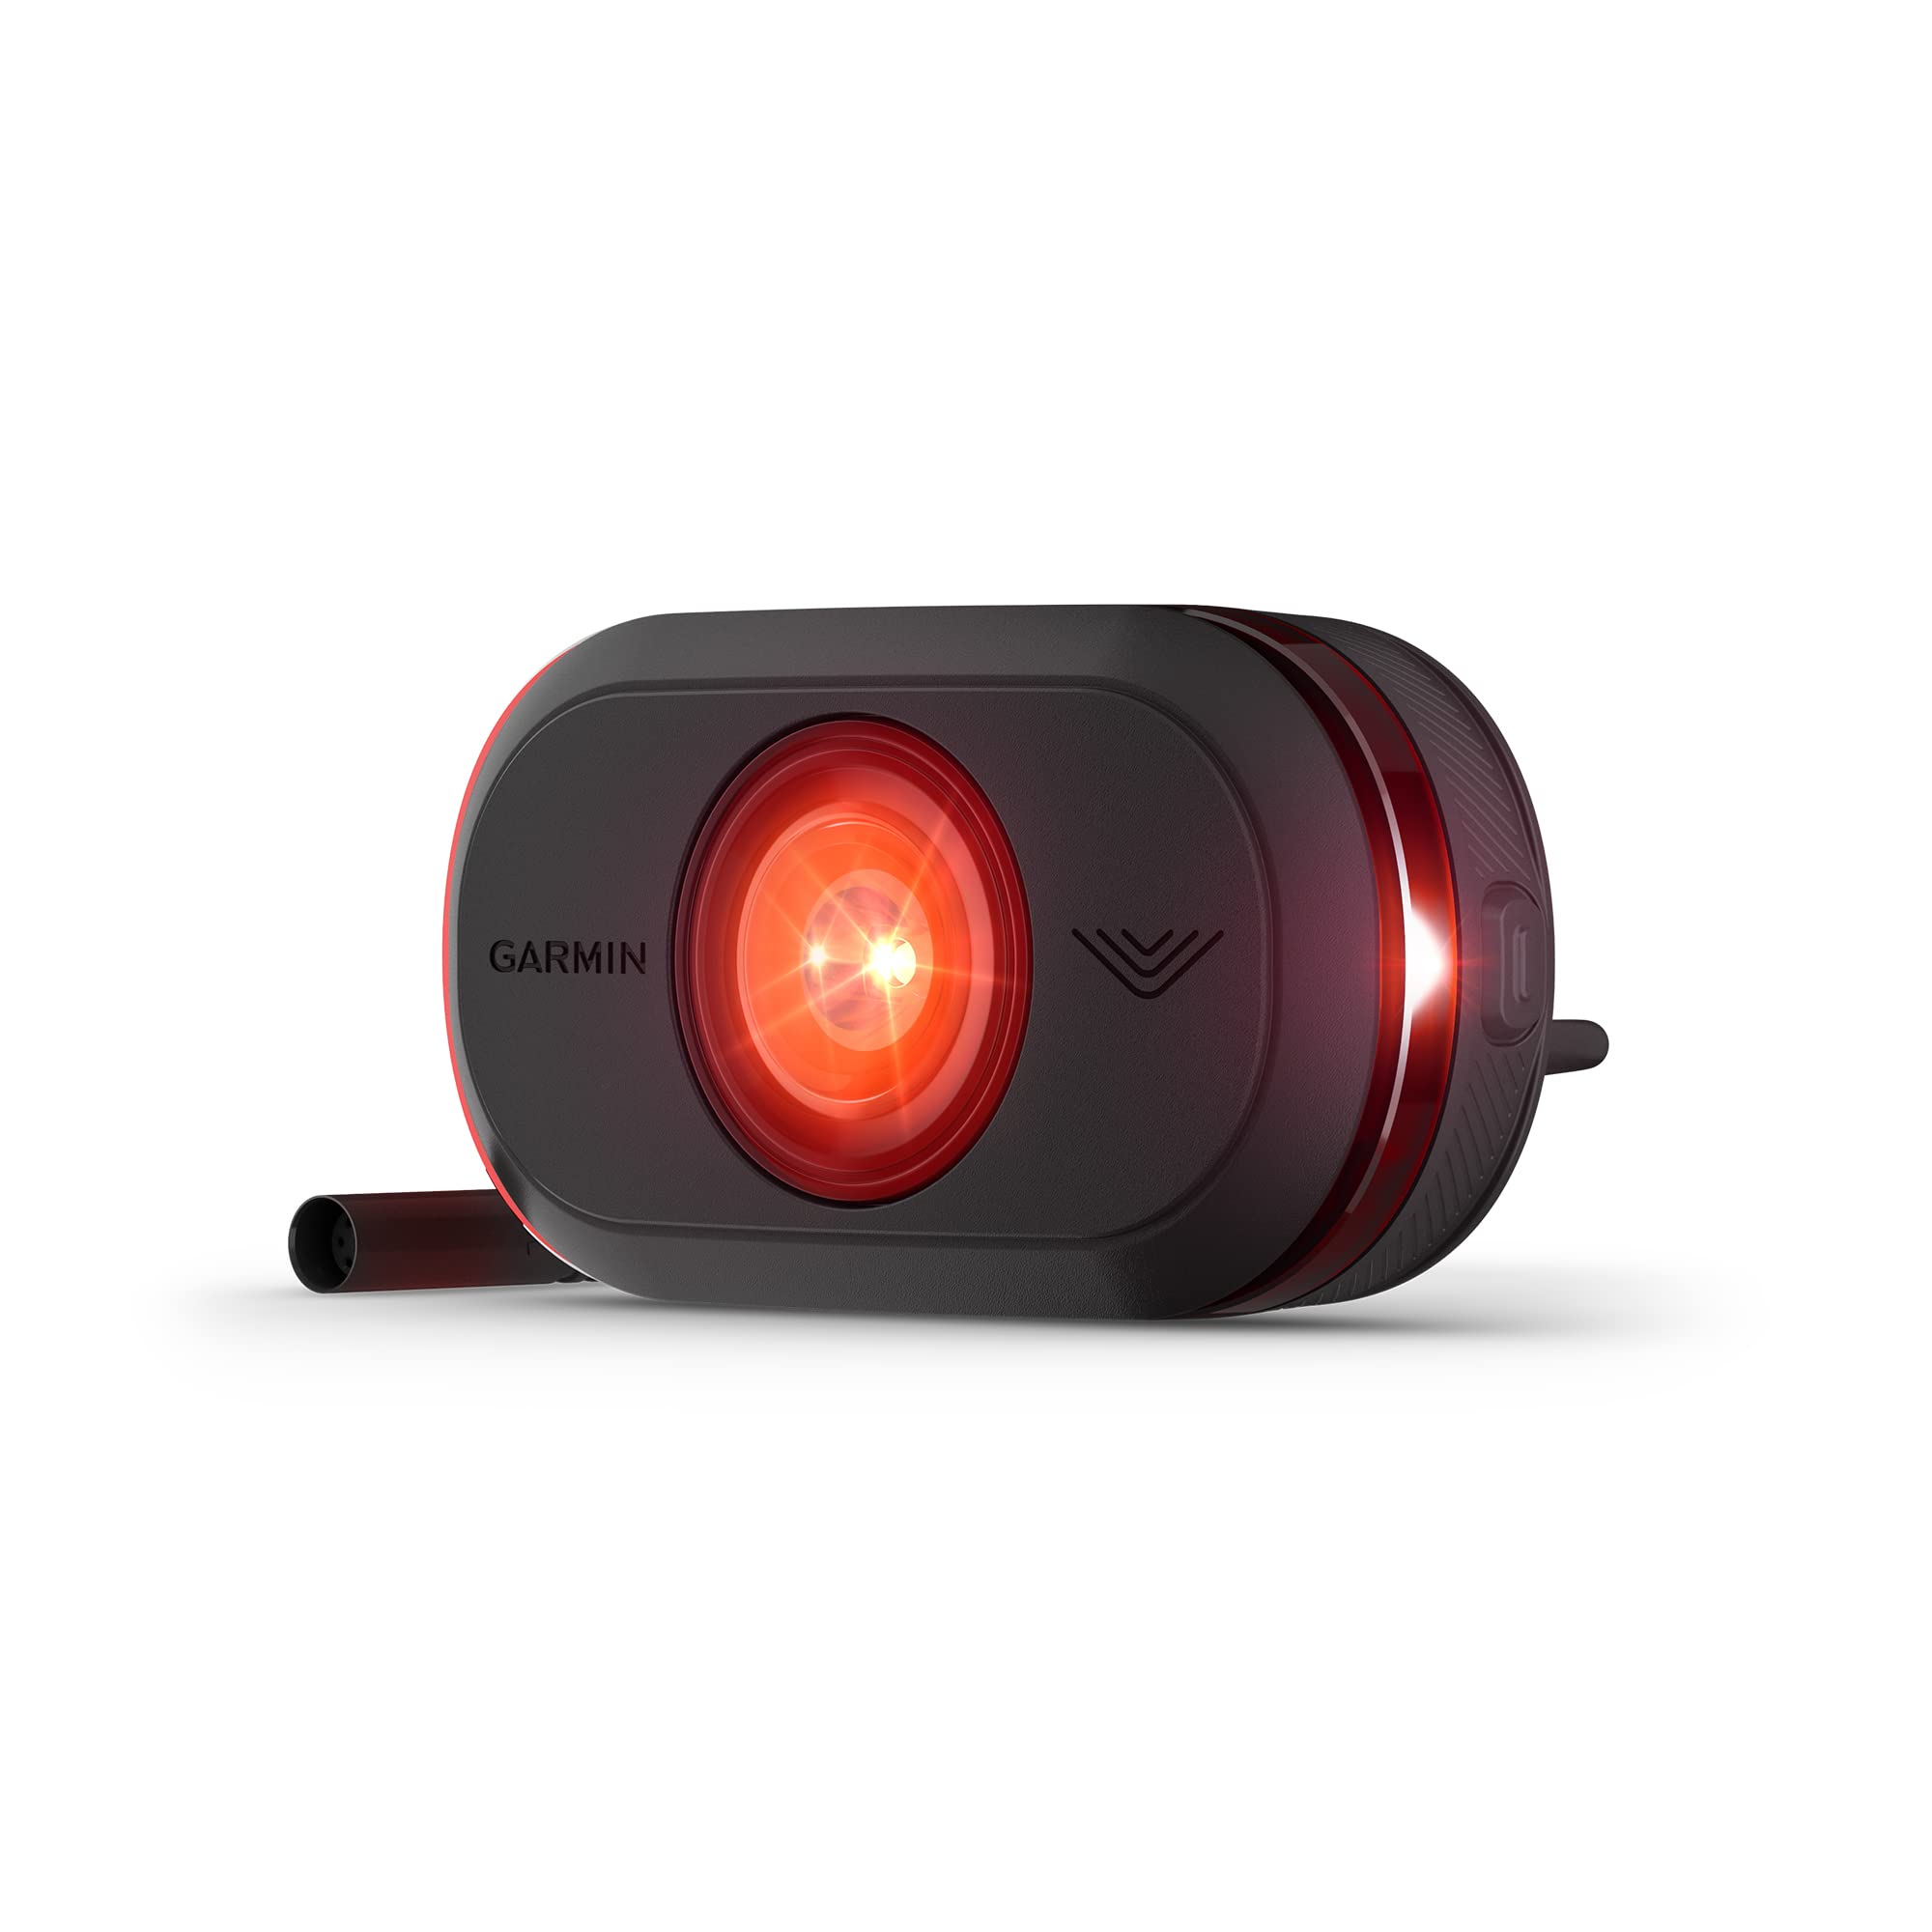 Garmin Varia eRTL615, Rearview Radar and Tail Light, Powered by Your Compatible eBike, Visibility up to 1 Mile Away